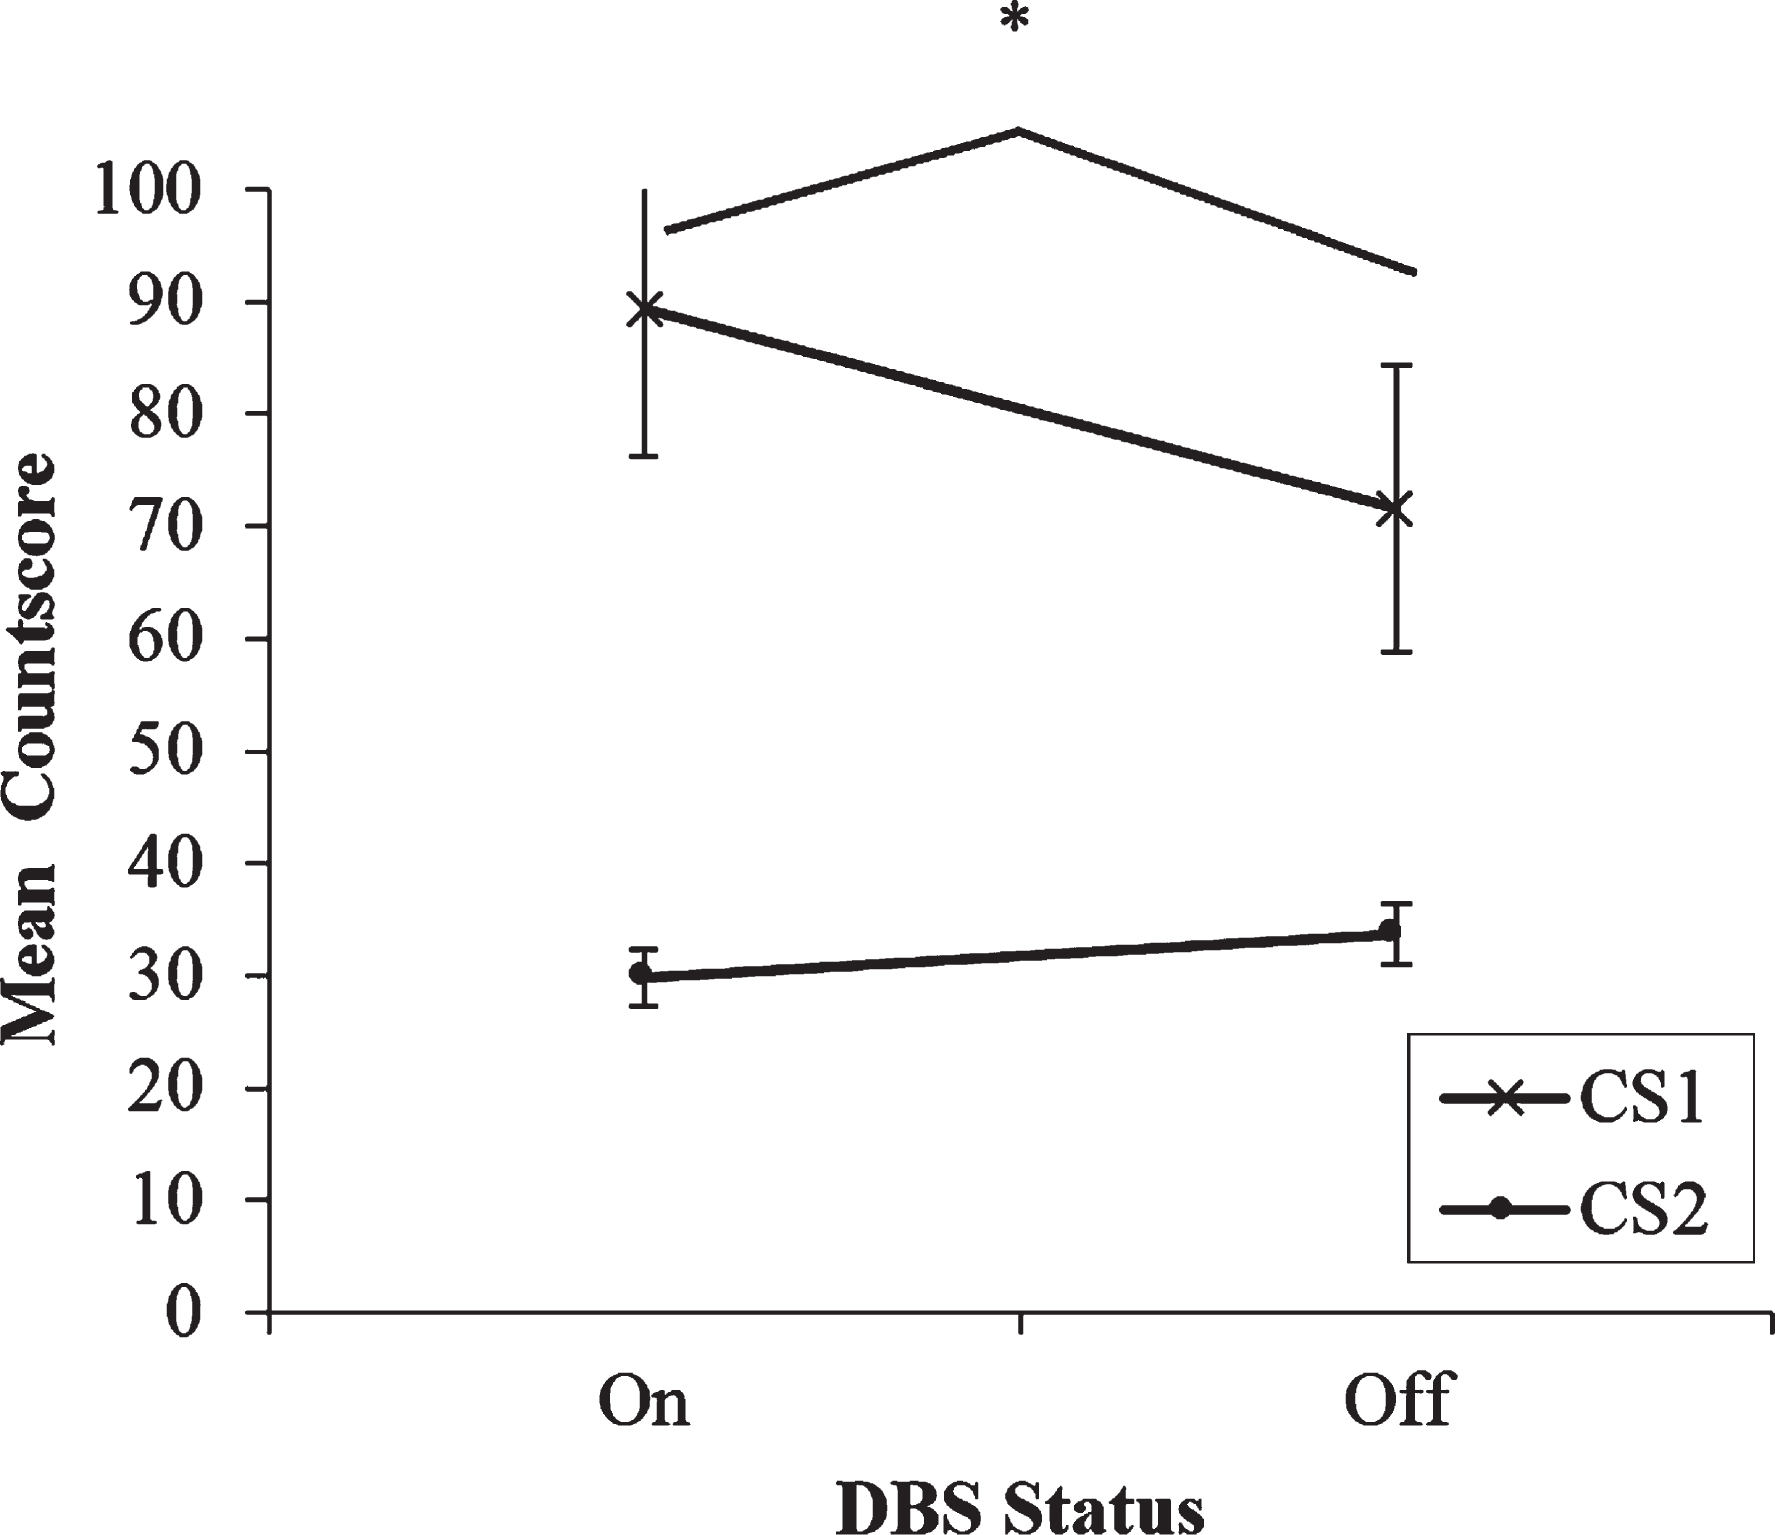 Mean countscore 1 (CS1) and countscore 2 (CS2) at the fastest rate (1 Hz) of paced random number generation, with deep brain stimulation (DBS) of the subthalamic nucleus on versus off. Error bars are standard error. An asterisk indicates the comparison between on and off stimulation was significant.